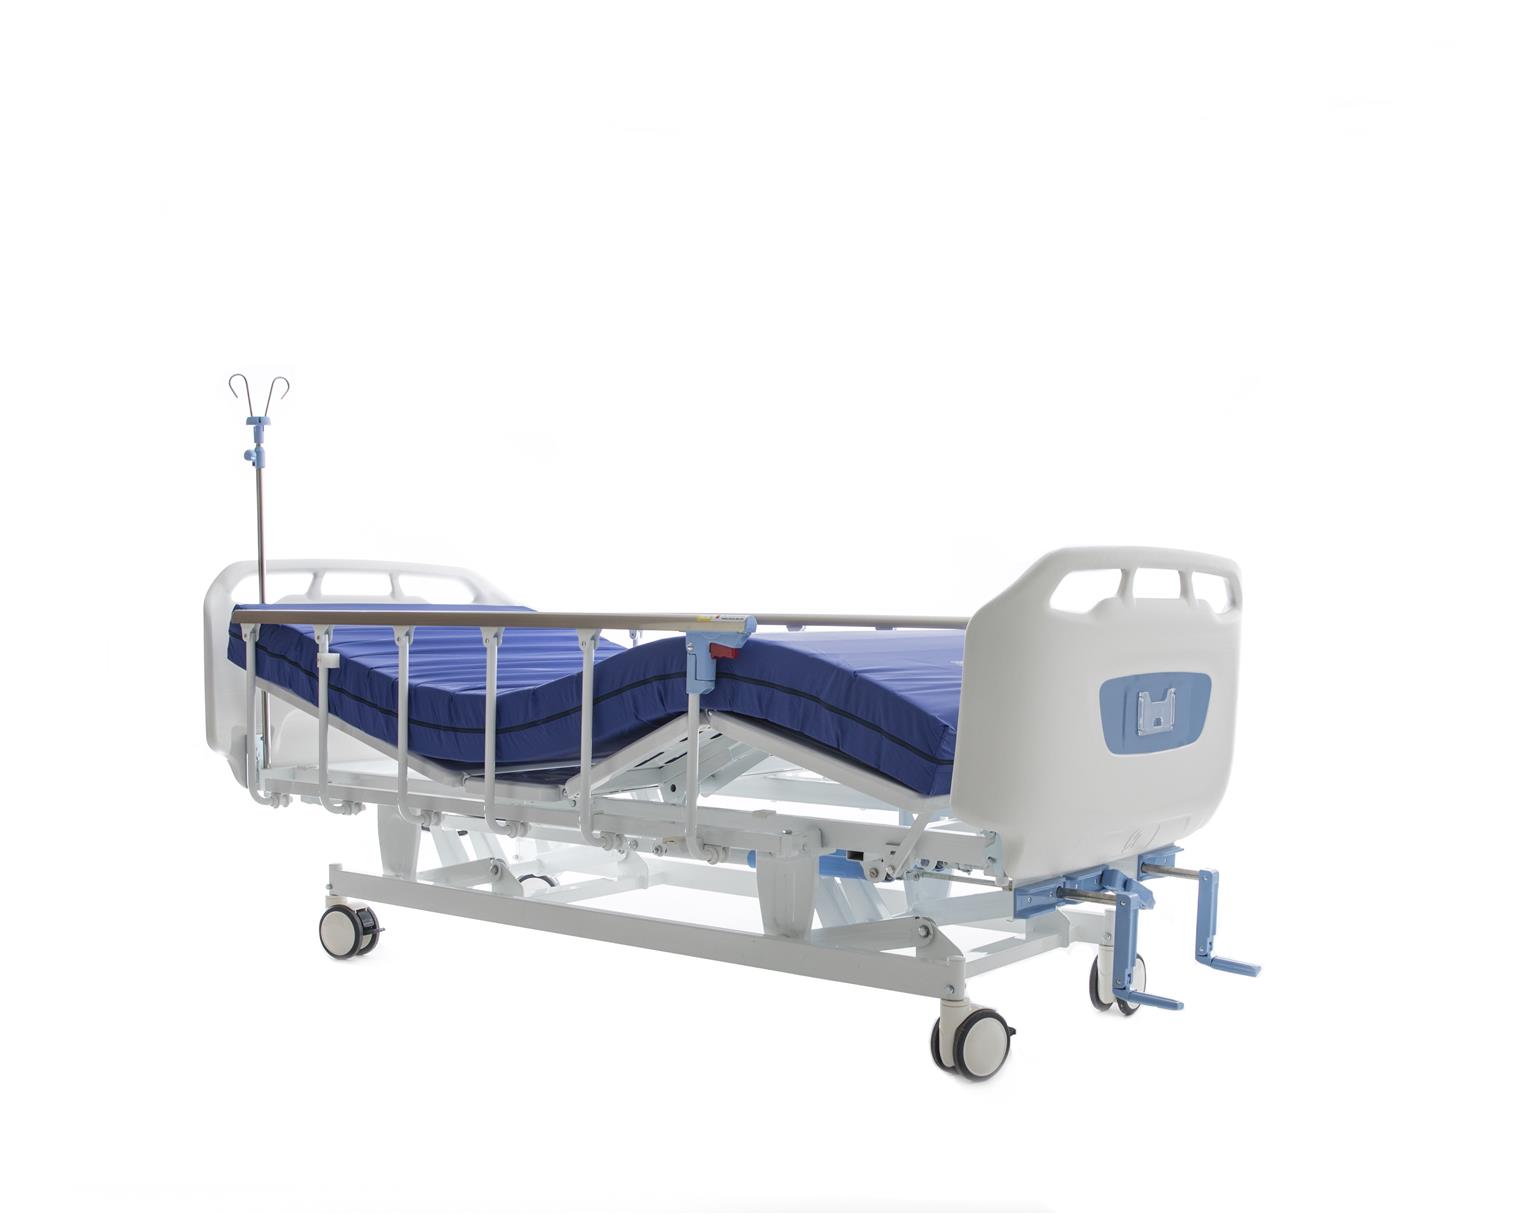 3 Crank Hospital Bed - On Sale, FREE DELIVERY. While Stocks Last.